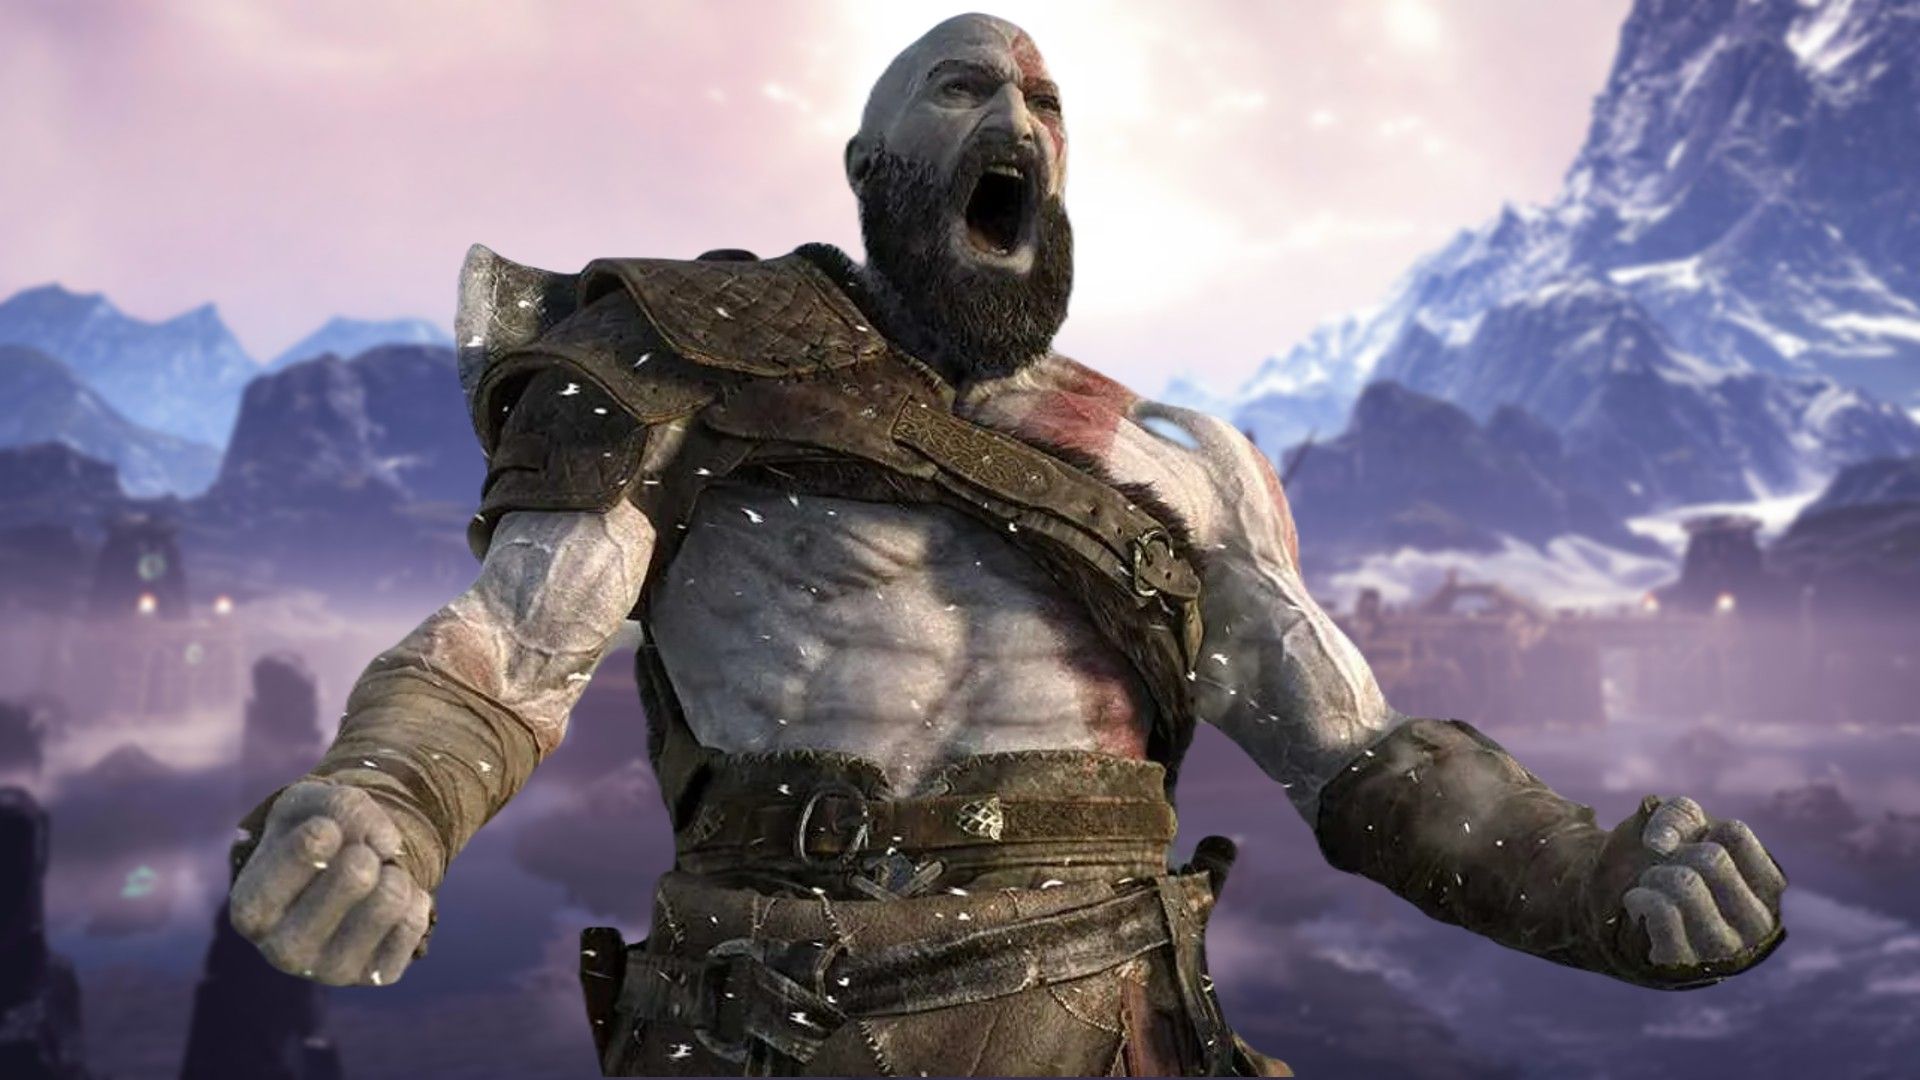 Kratos screaming over a slightly blurred Midgard background from God of War